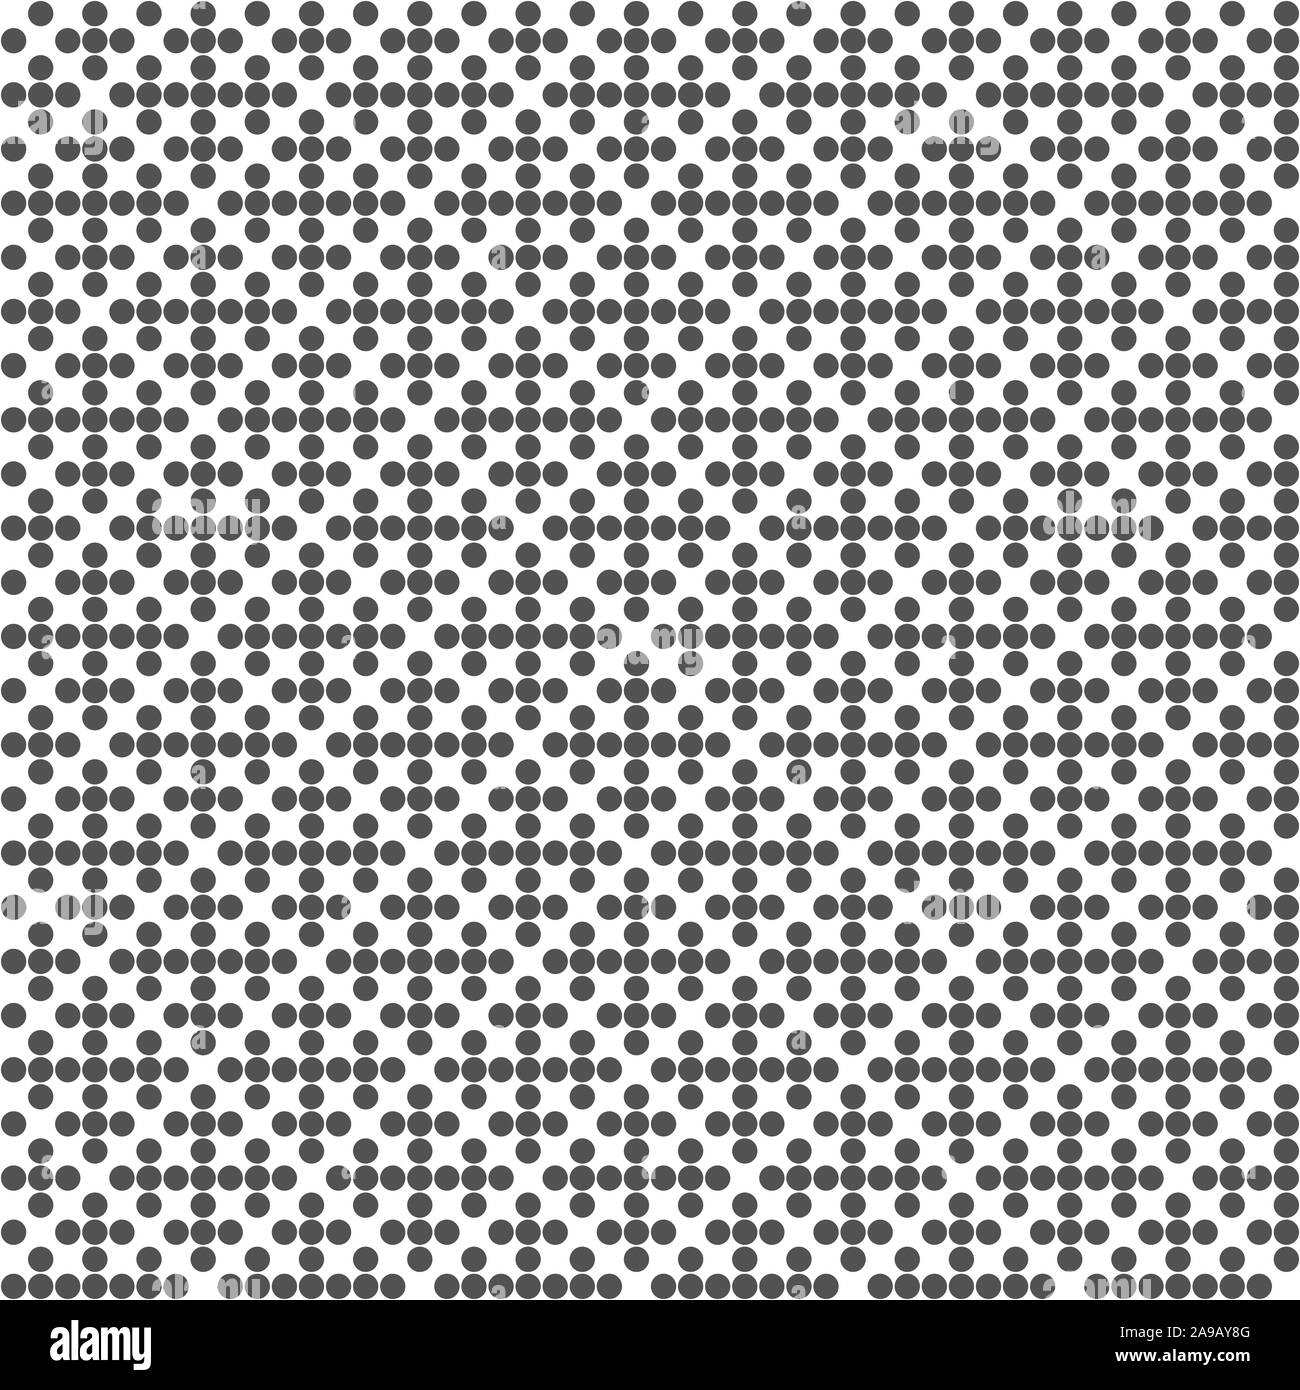 Abstract geometric seamless pattern. Dotted black and white halftone background. For wallpapers, textile design Stock Vector